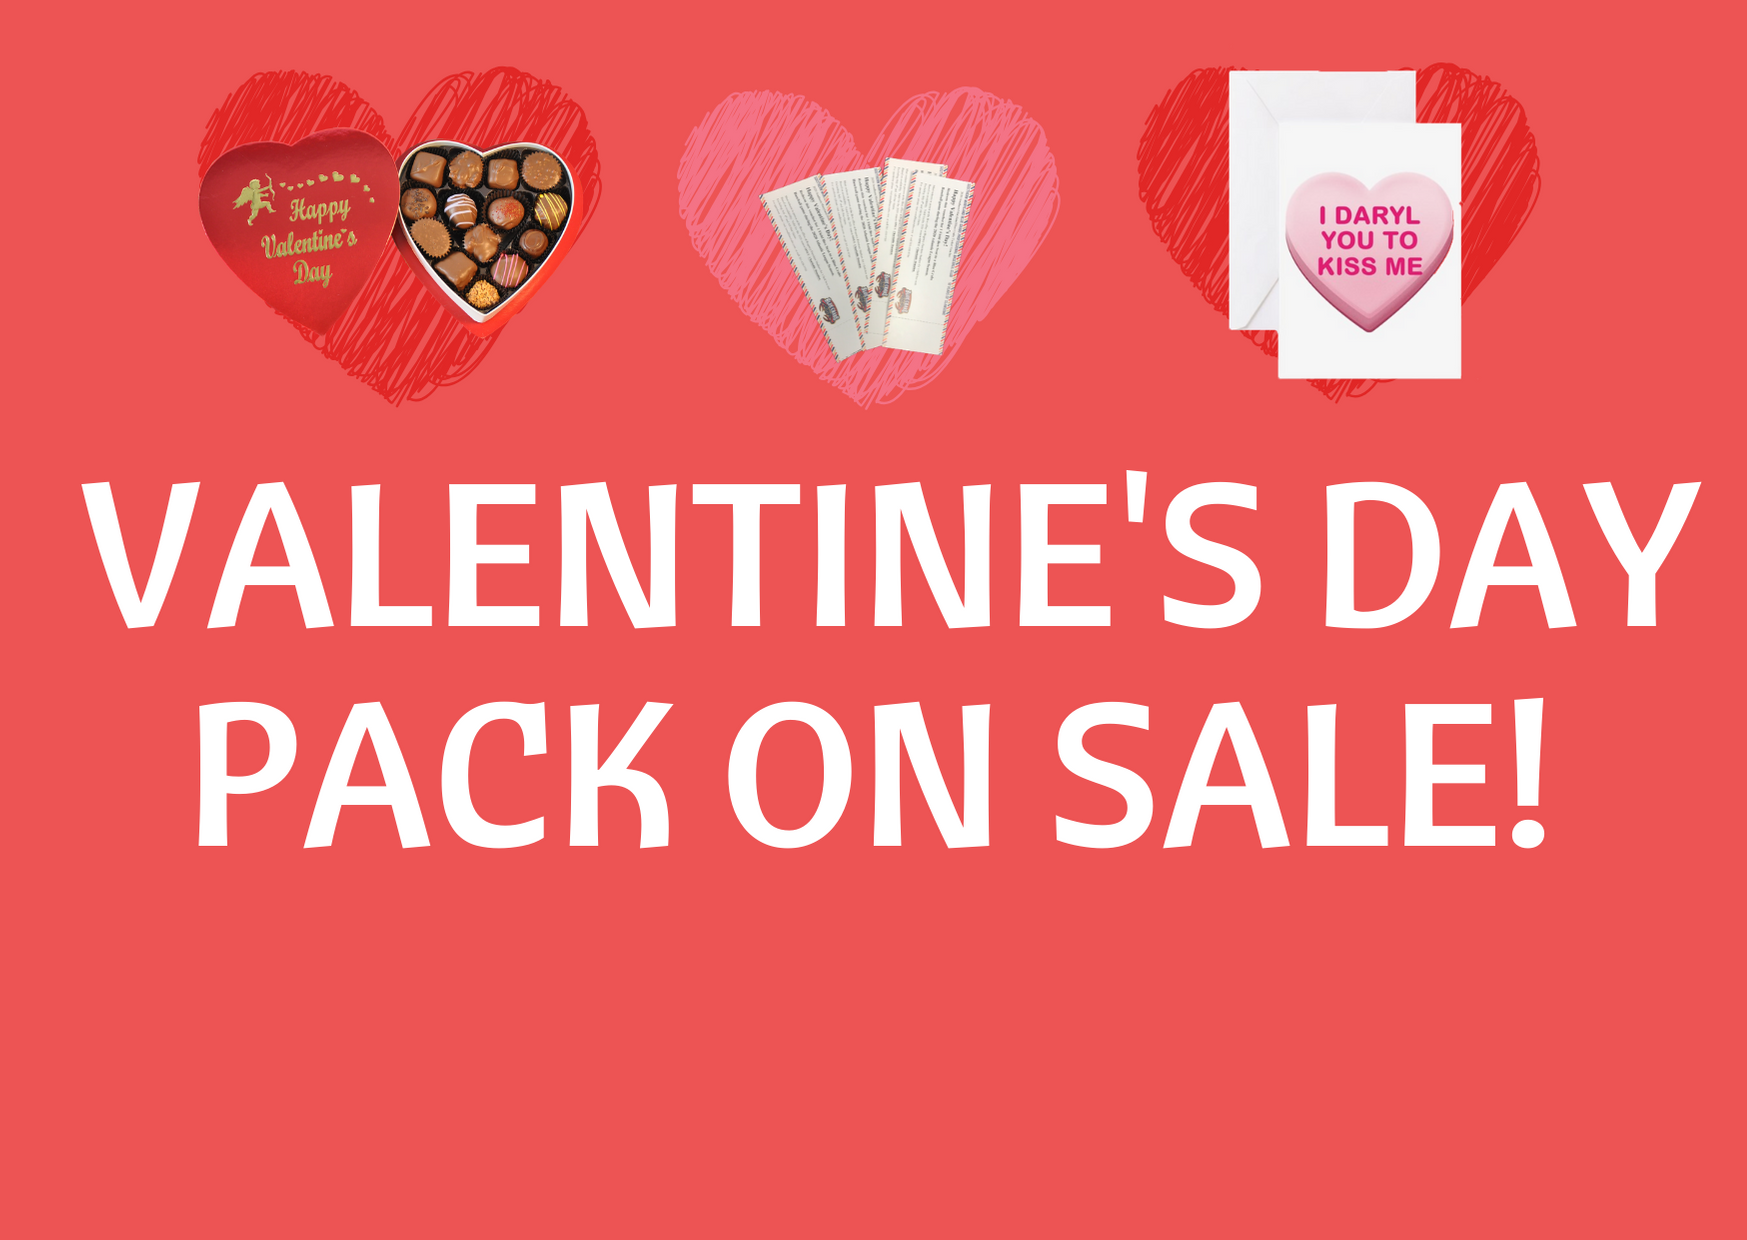 Blue Crabs Valentine's Day Packs On Sale